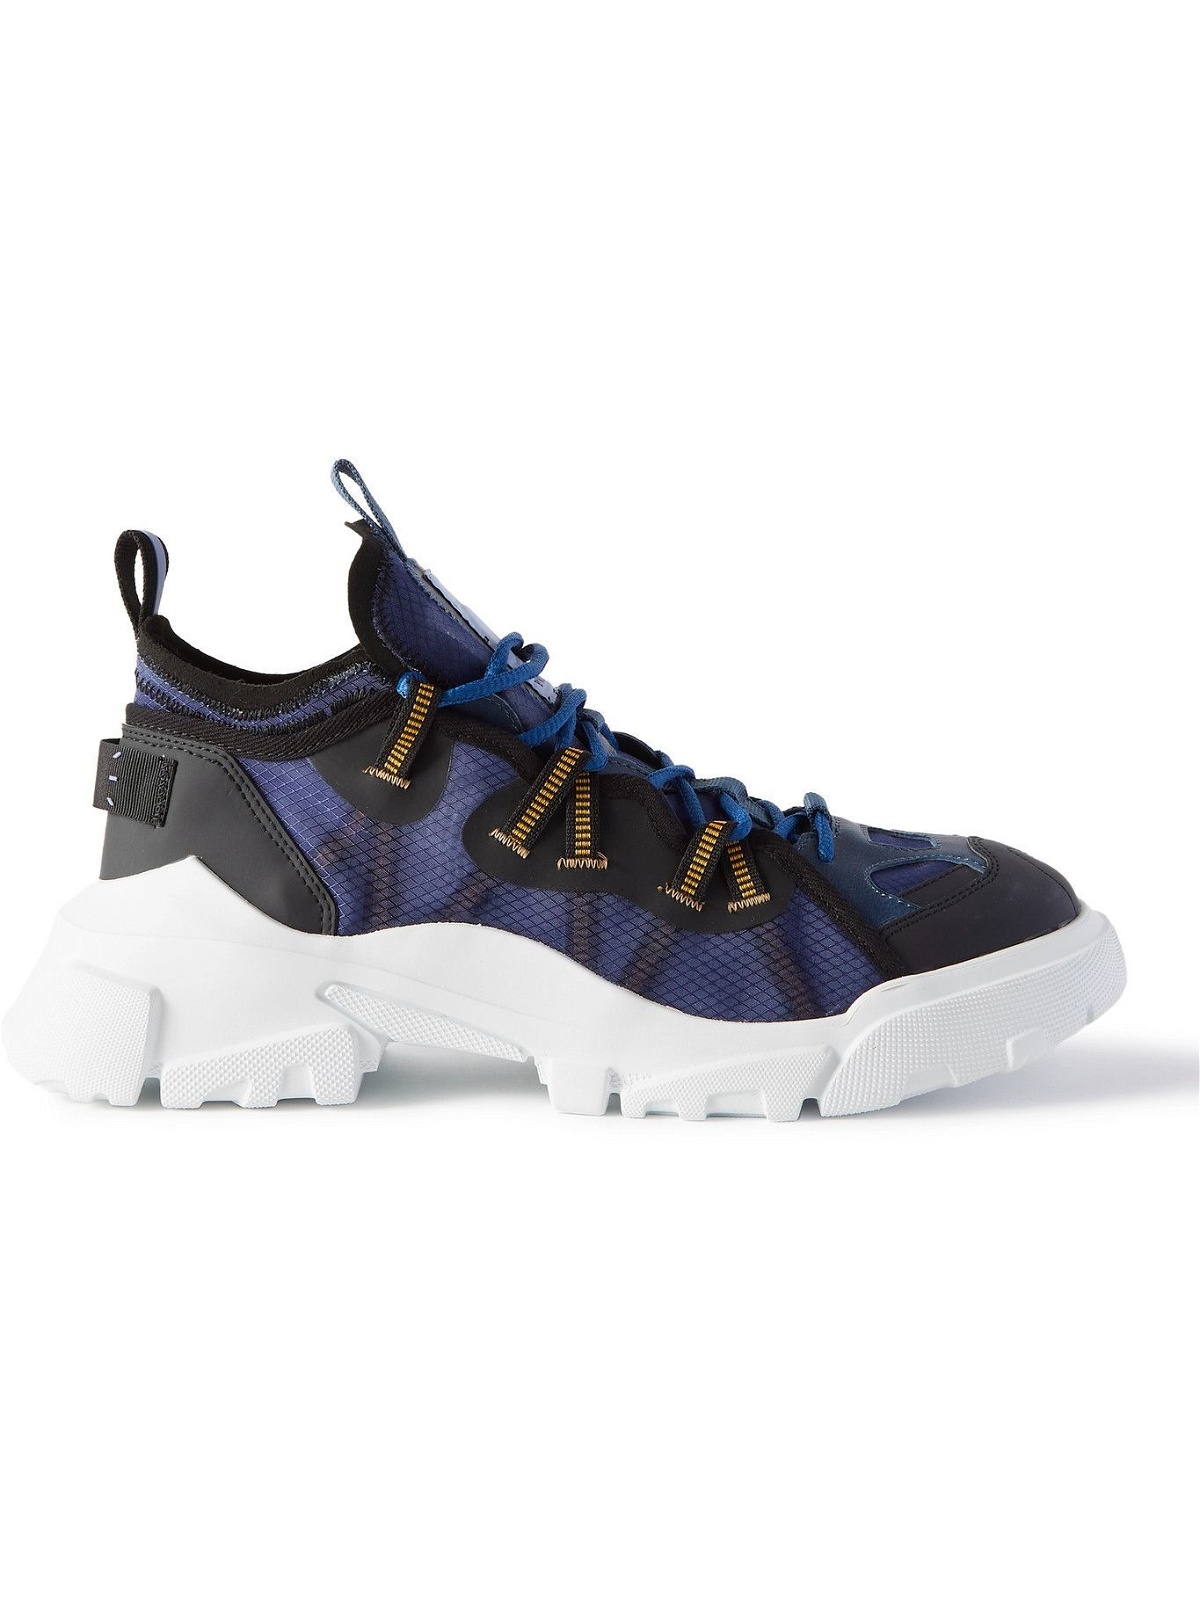 Photo: MCQ - Breathe BR-7 Orbyt Descender Leather-Trimmed Ripstop Sneakers - Black